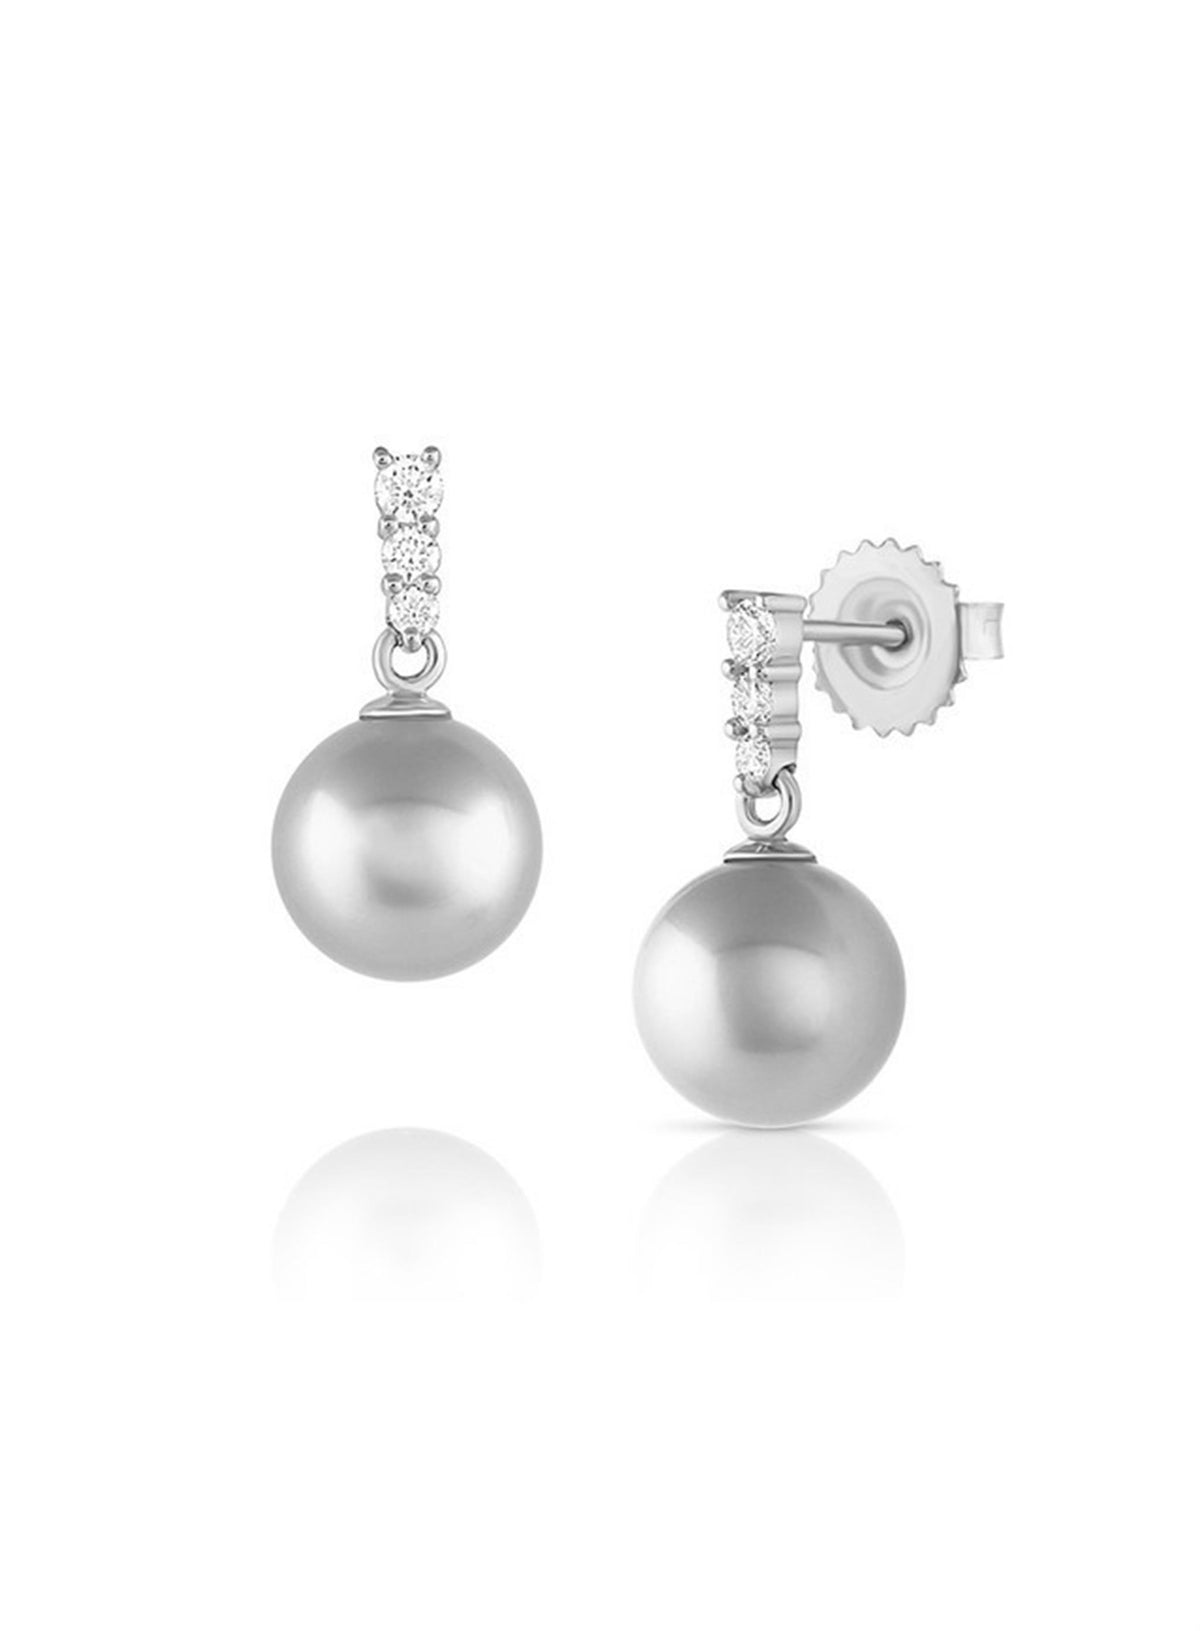 14kt White Gold Drop Earrings With 8mm Akoya Cultured Pearl